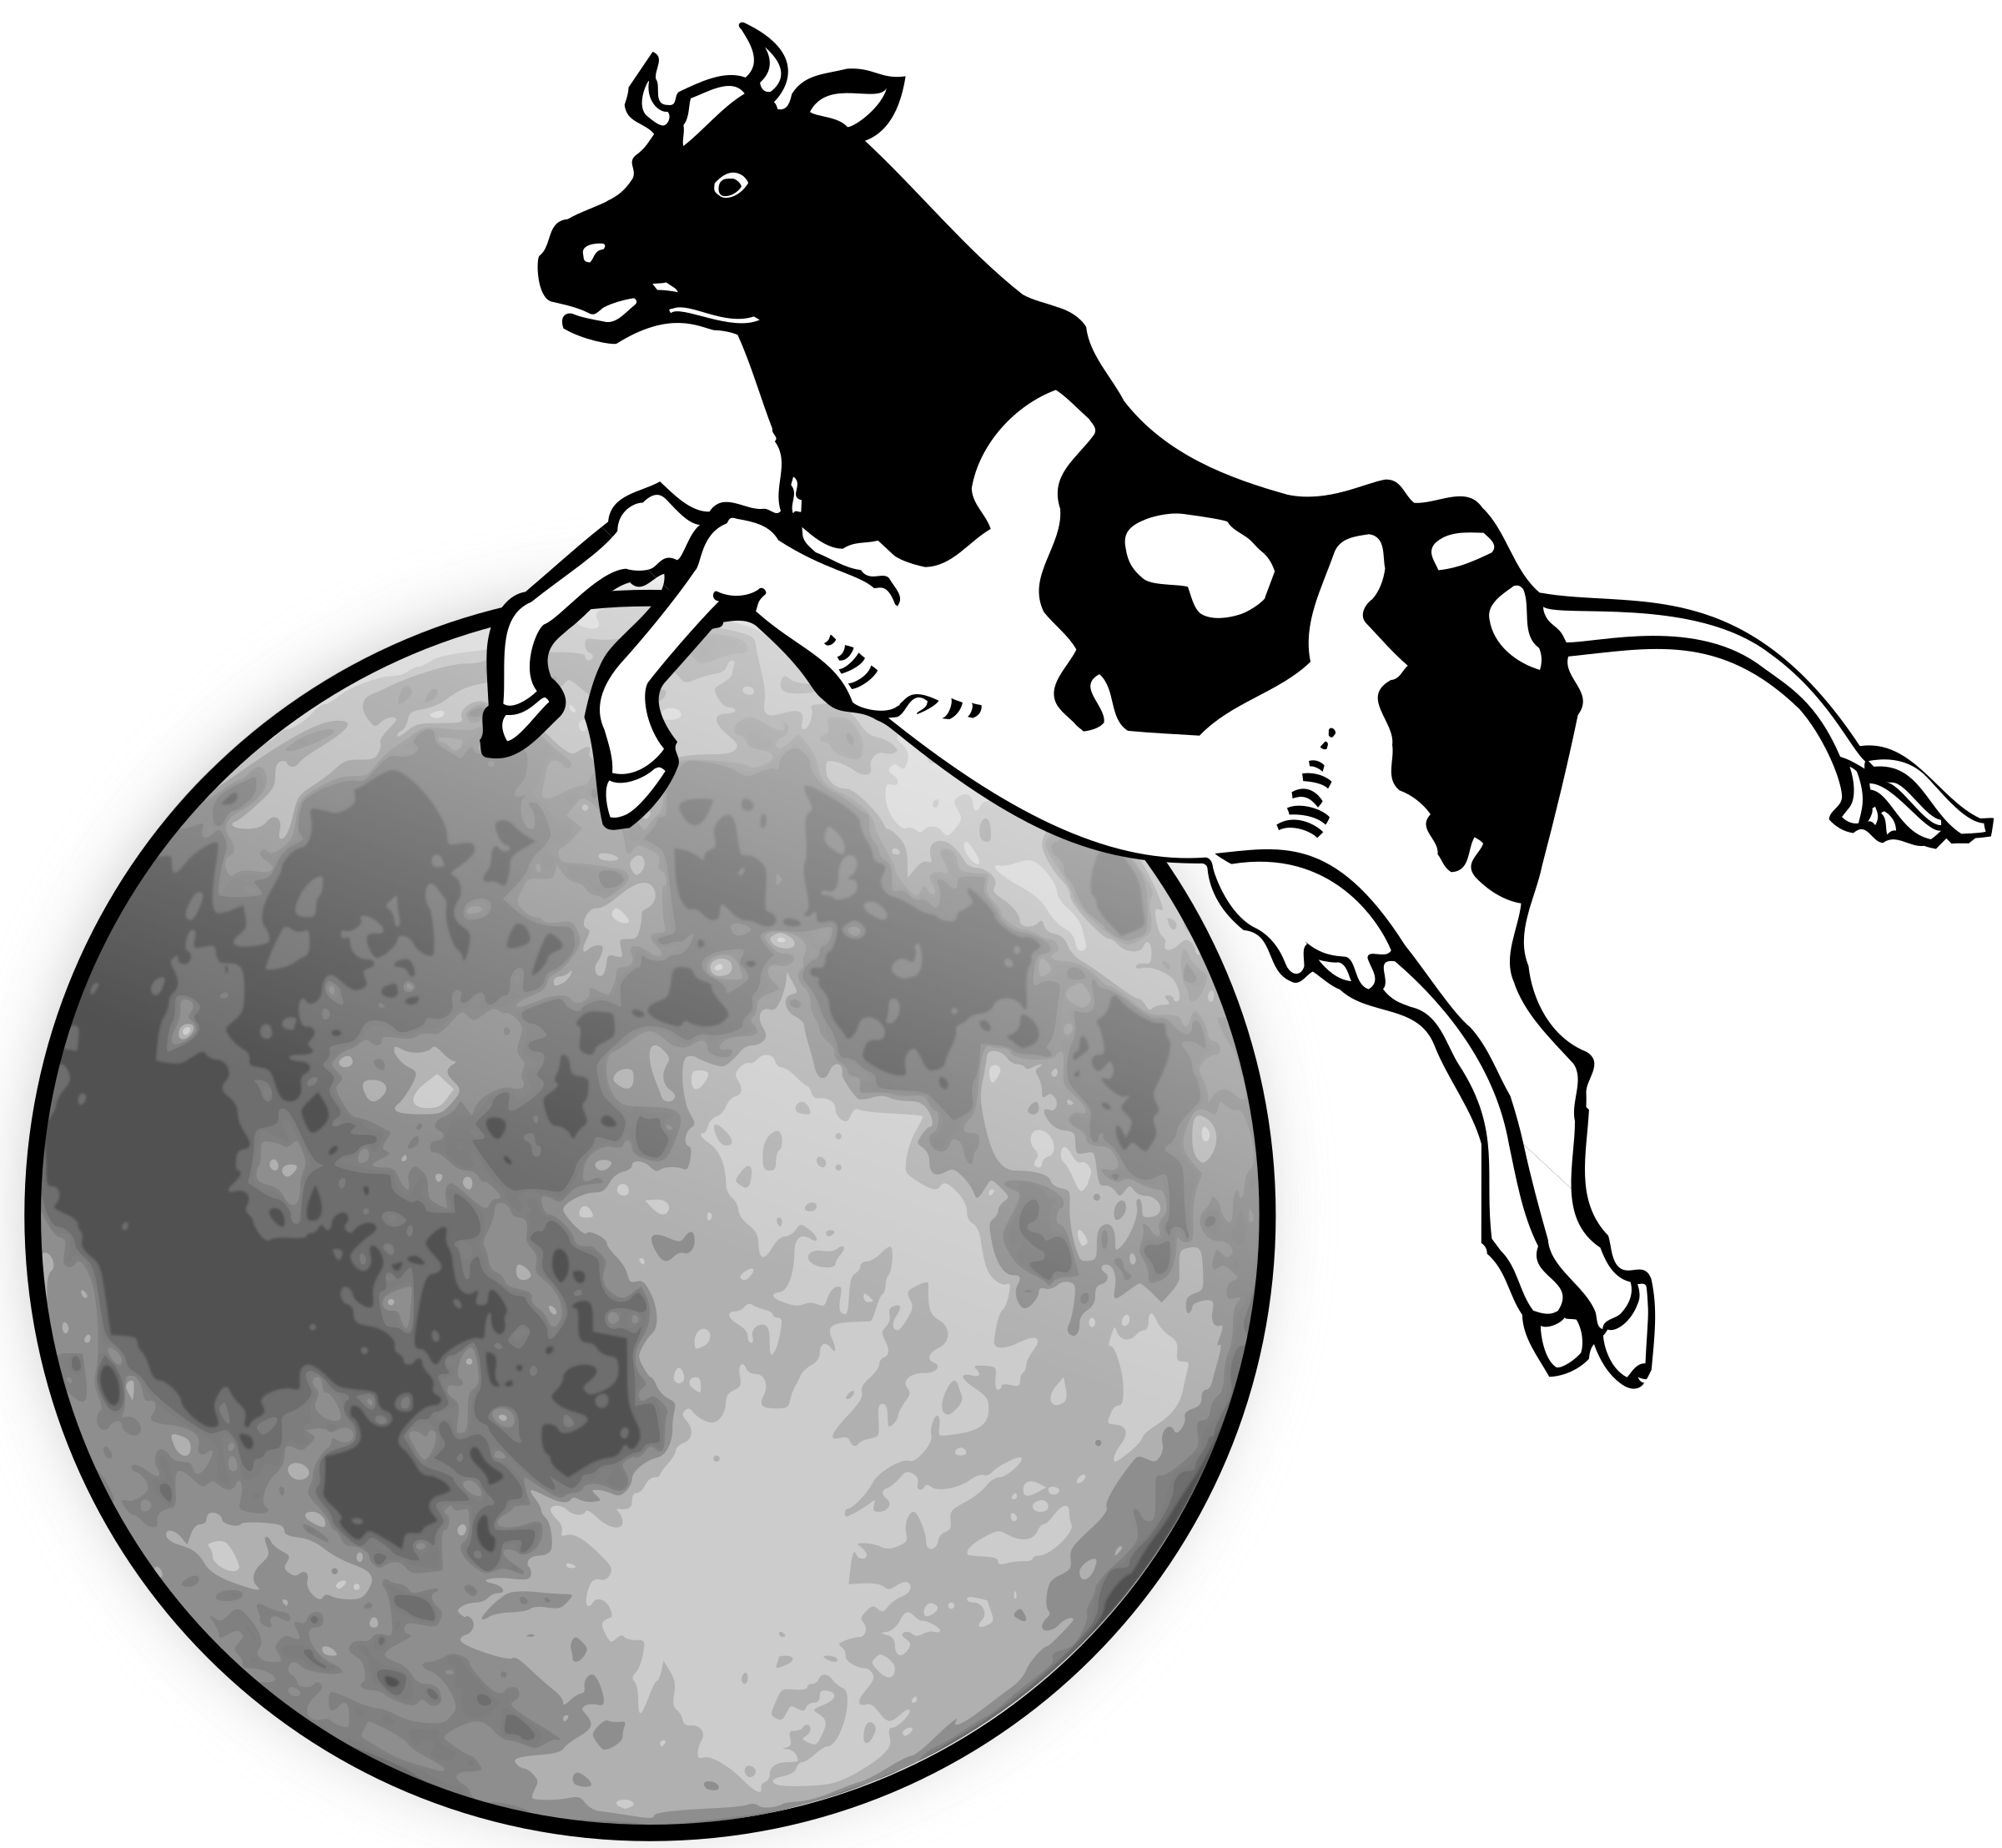 Cow jumping over the moon vector clipart image - Free stock photo